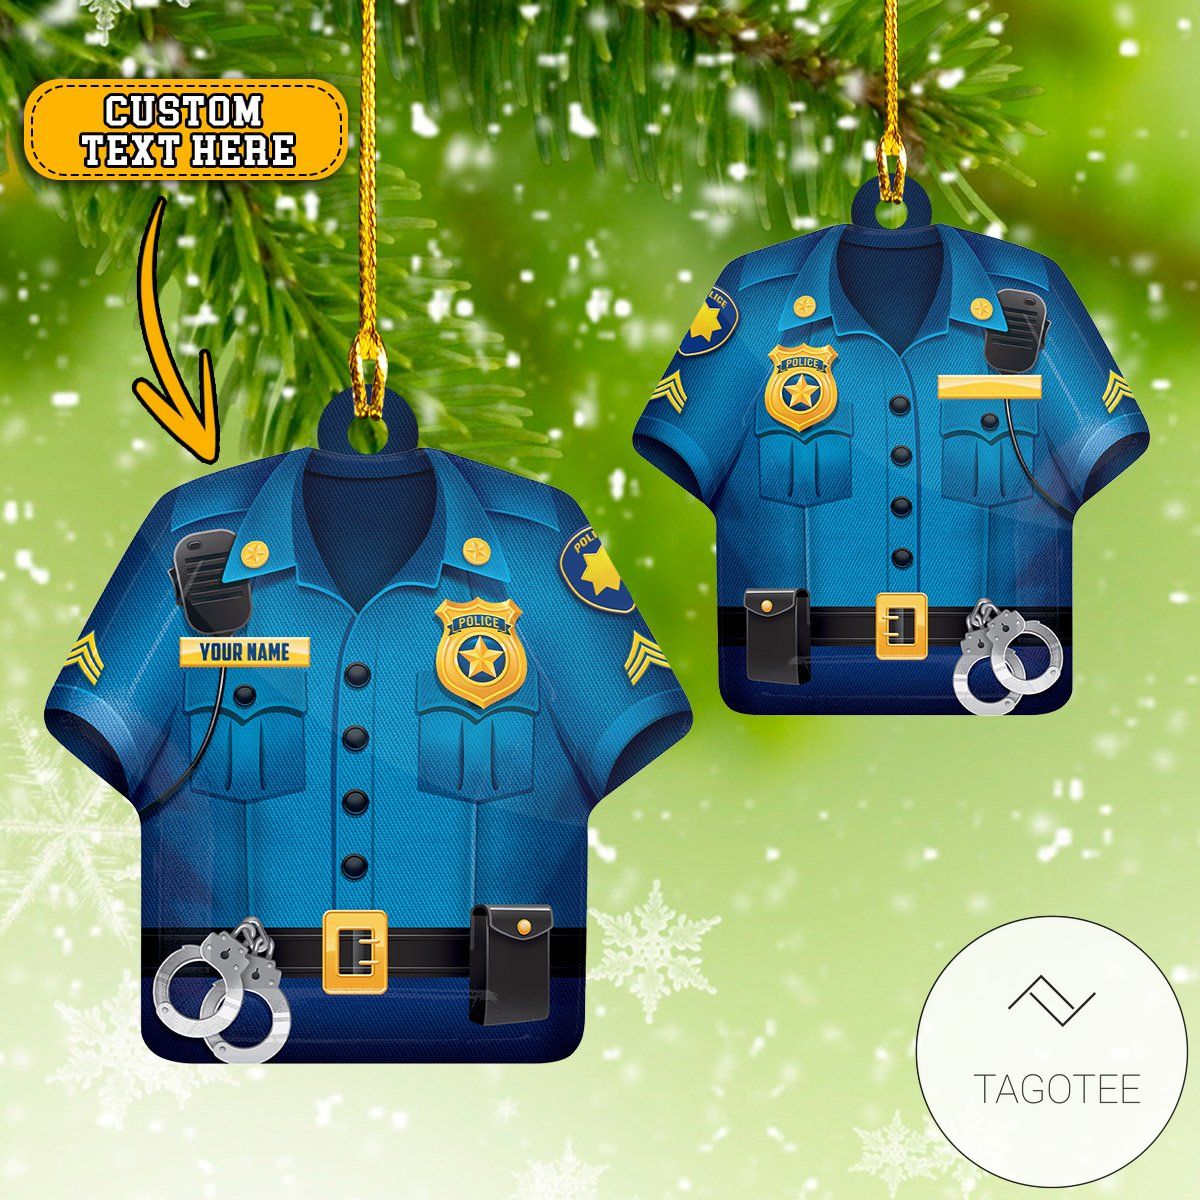 Personalized Police Officer Uniform Ornament